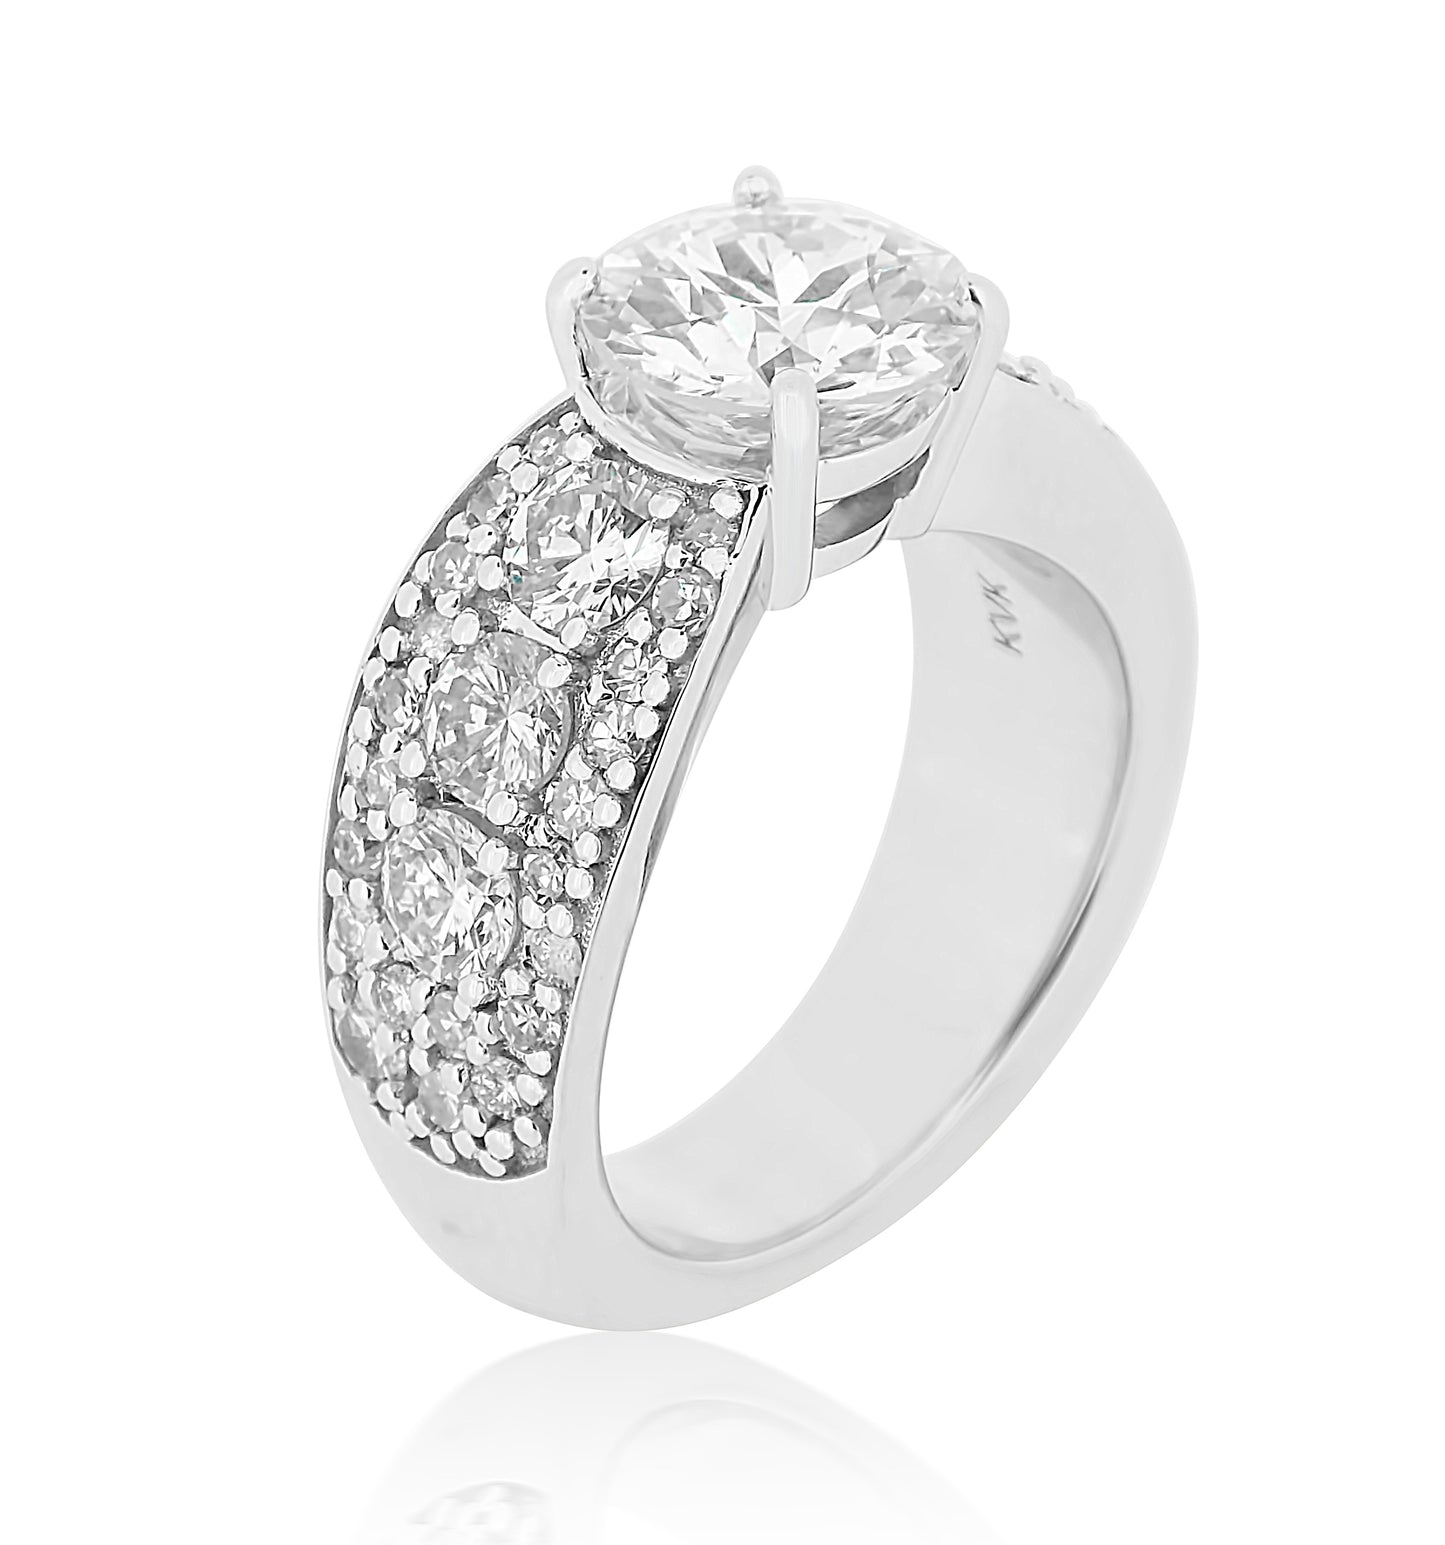 Spectacular Wide Paved Diamond Ring